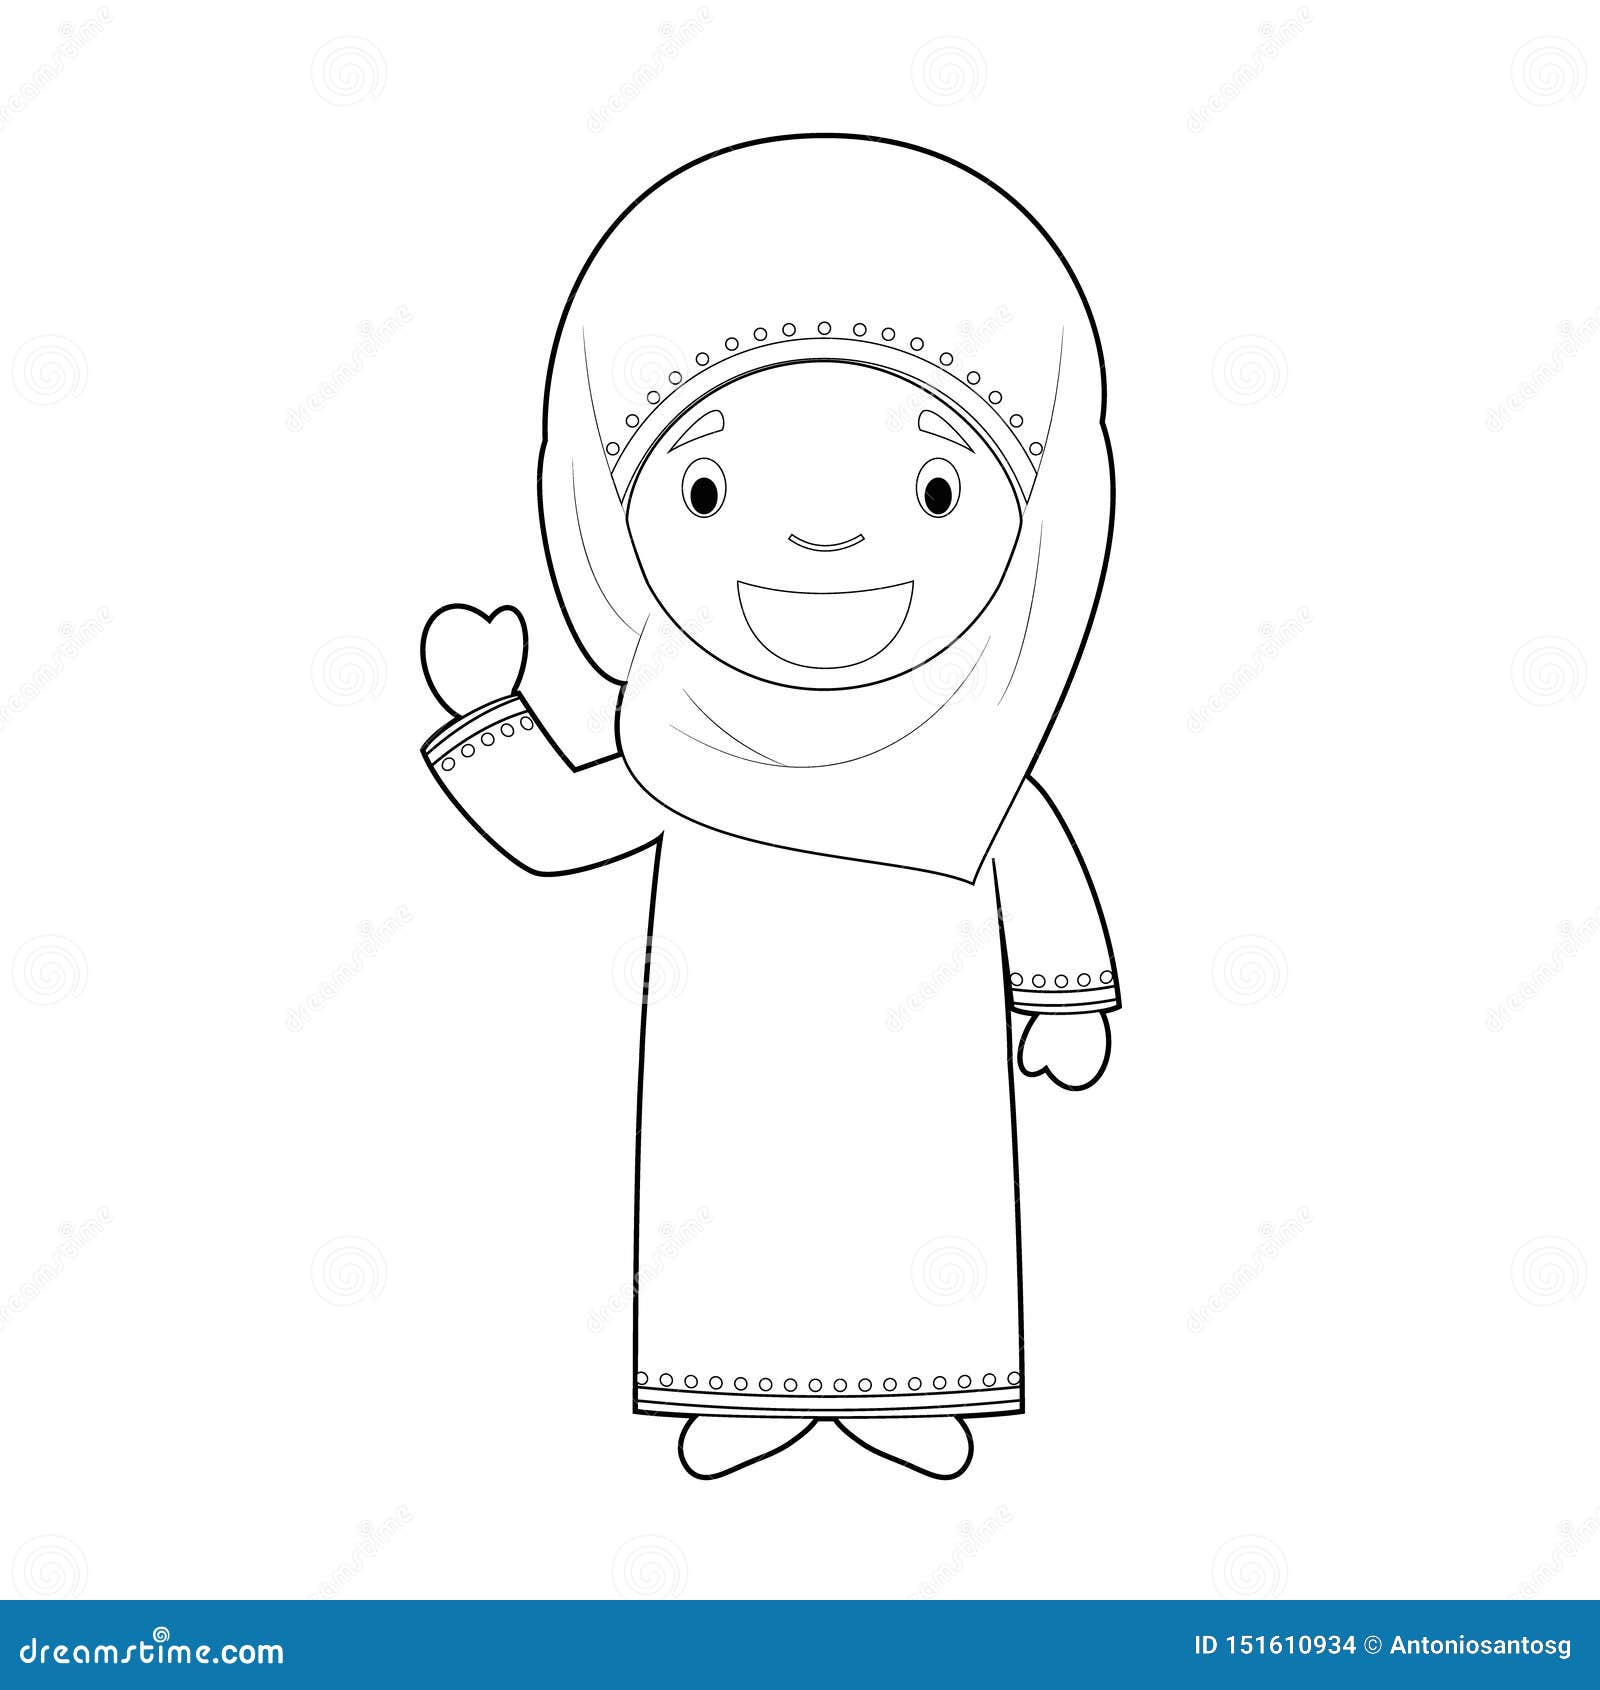 Download Easy Coloring Cartoon Character From Qatar Dressed In The Traditional Way Vector Illustration Stock Vector Illustration Of Hiyab Drawing 151610934